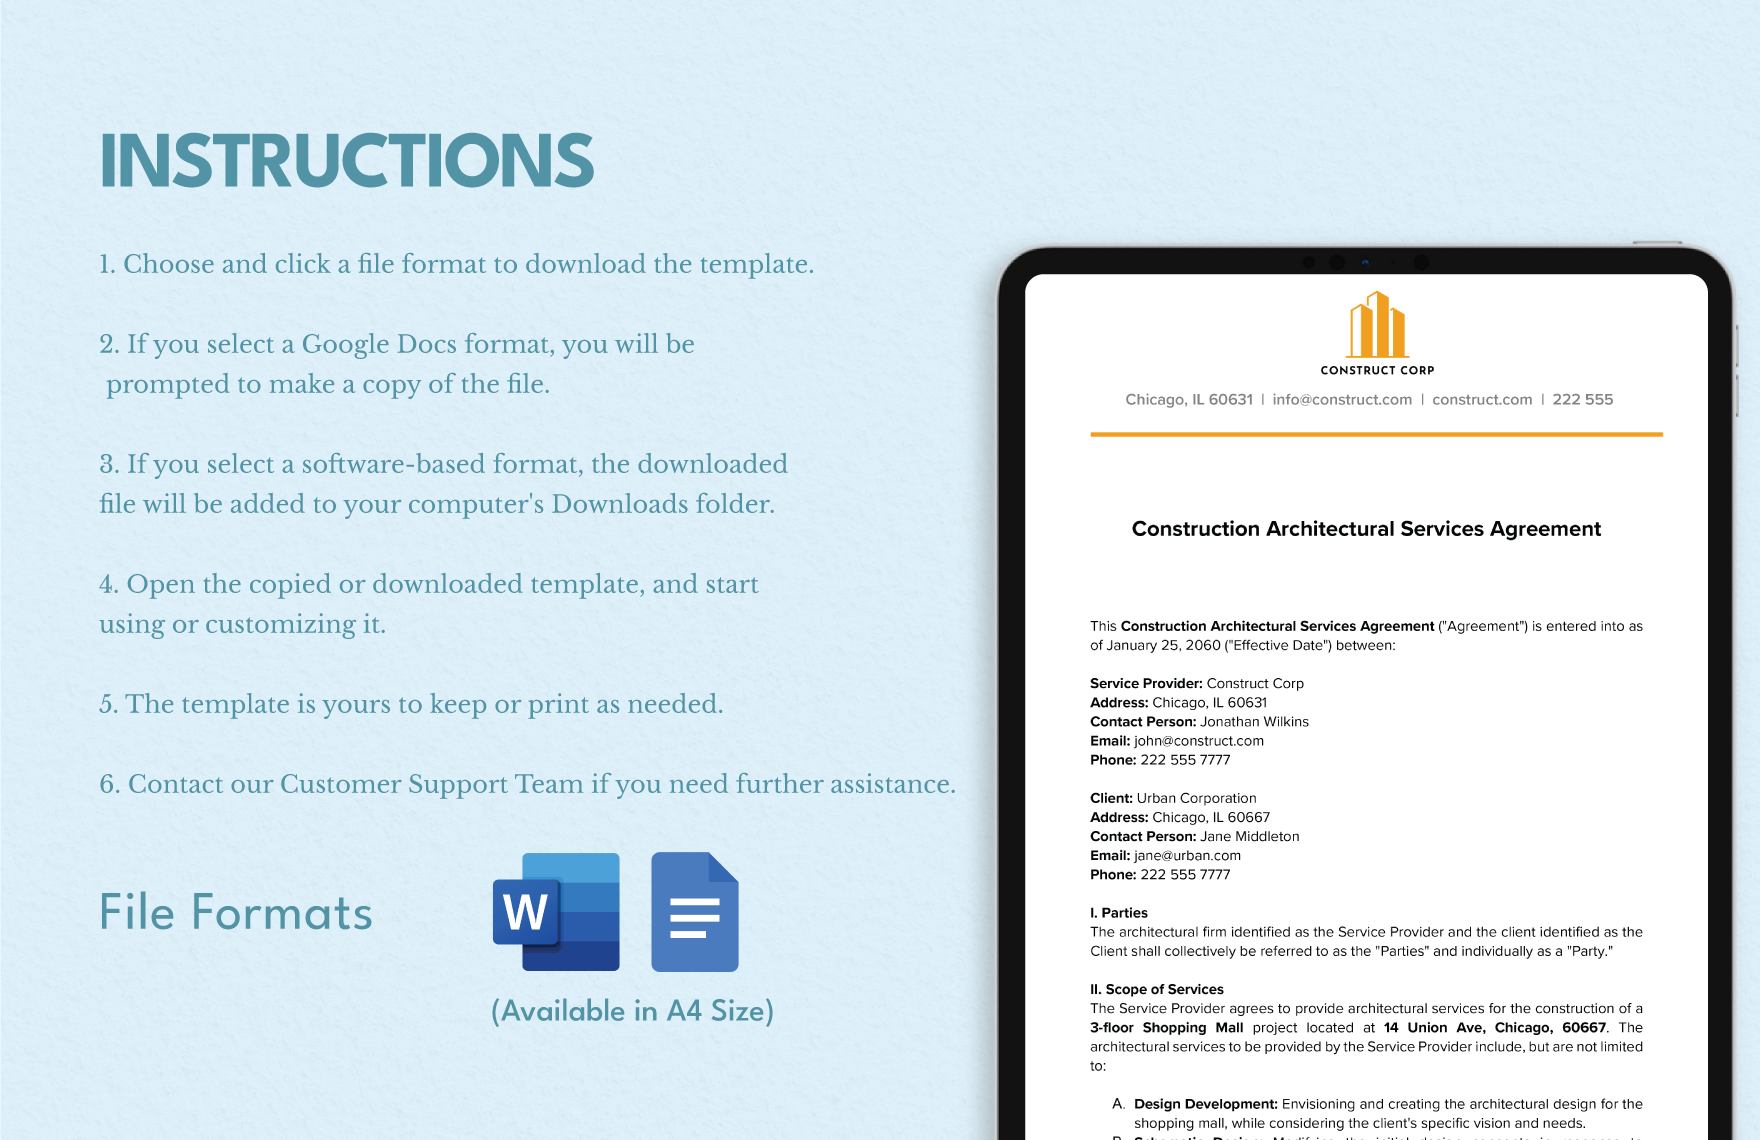 Construction Architectural Services Agreement Template